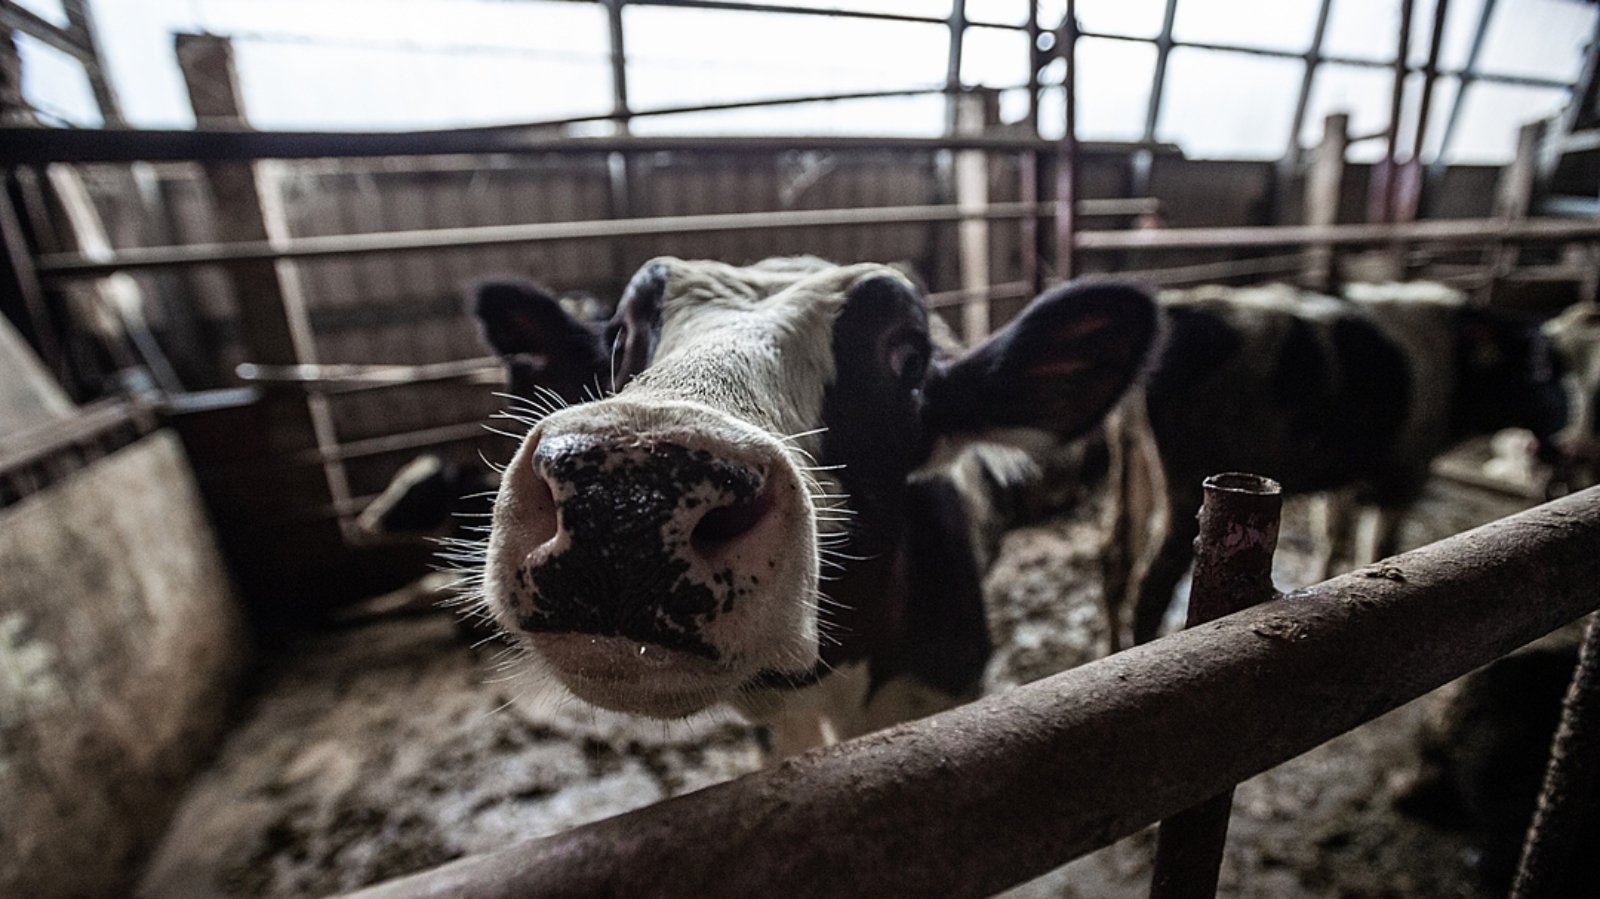 Organic Dairy Farm Could Face Criminal Charges Following Violent Animal Abuse